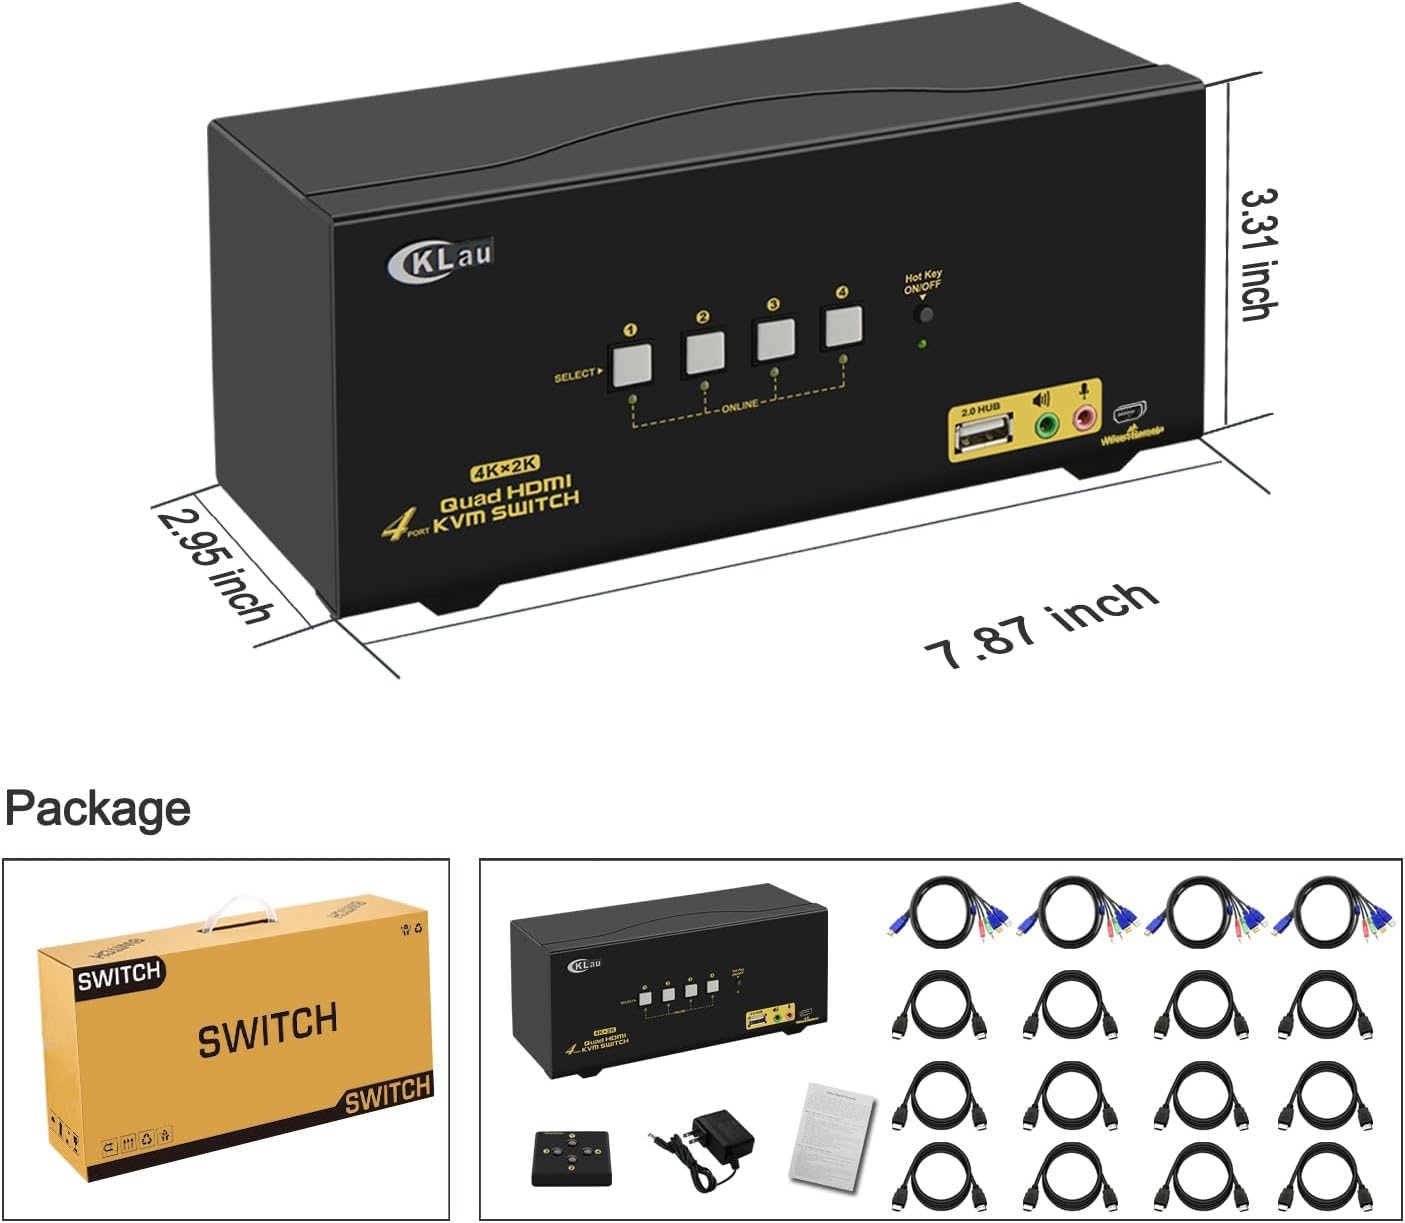 Diverse array of devices compatible with the CKLau KVM Switch